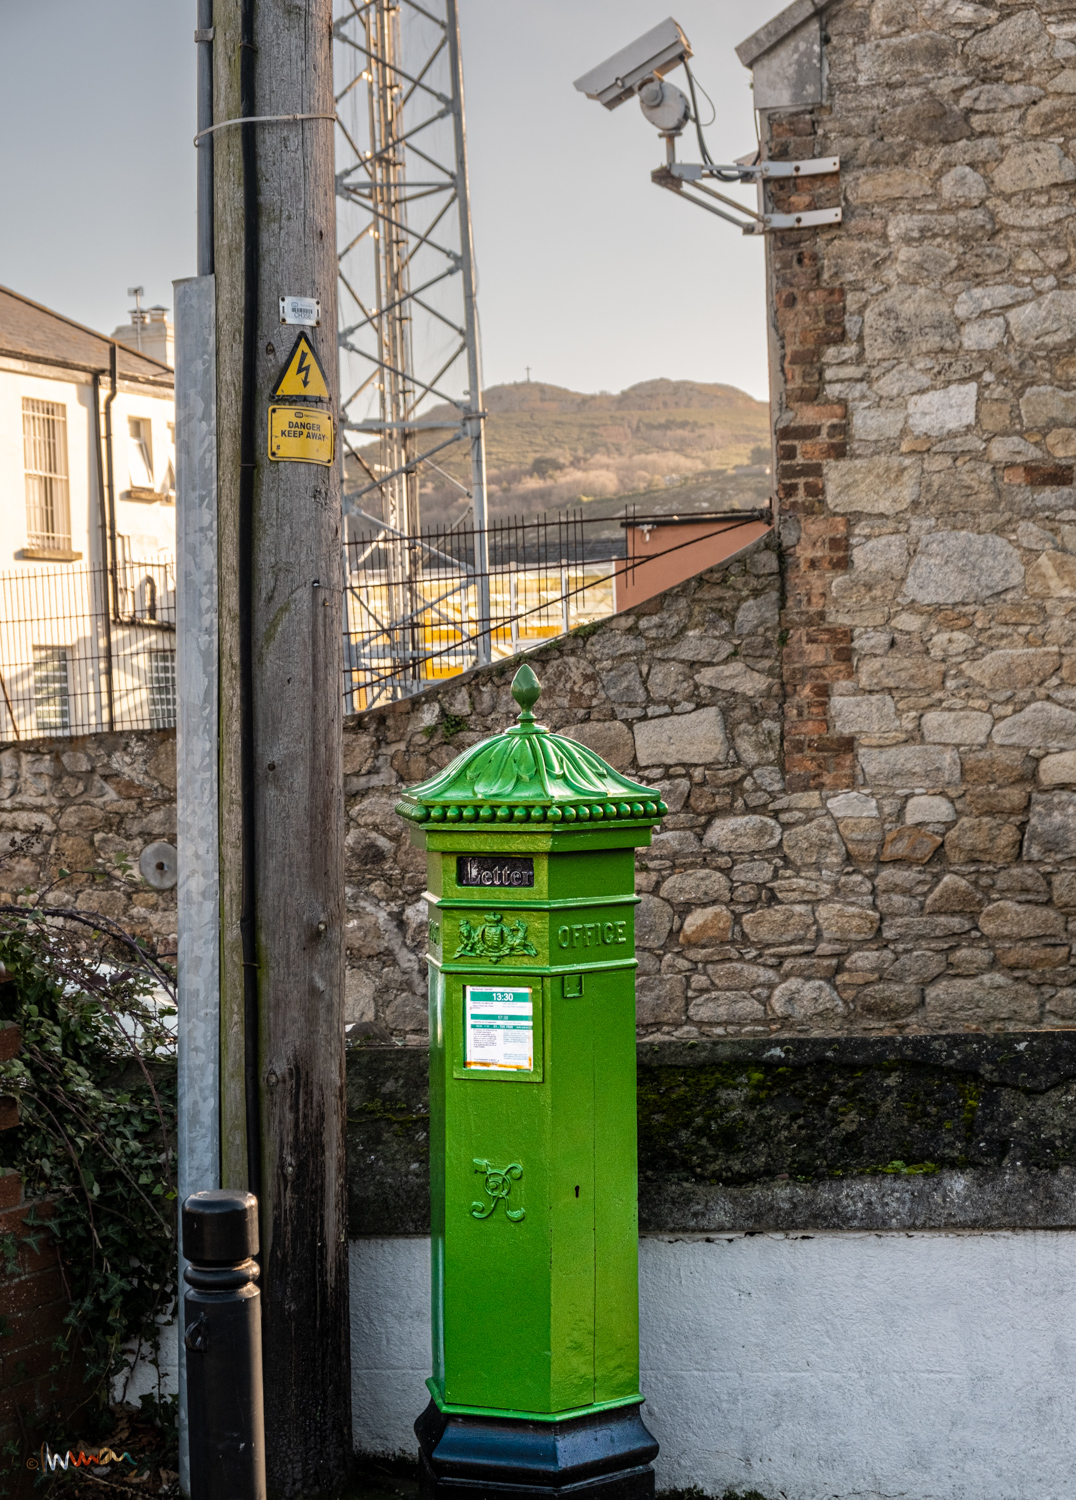 One of three active Penfold post boxes that remain in Ireland. Designed by J W Penfold, they were manufactured and deployed from 1866 to 1879. The Christian cross on Bray Head, a radio mast and CCTV on a police station, a warning of death on a pole, the Queen Victoria imprimatur on a postbox replaced by less troublesome cylindrical designs. Change.